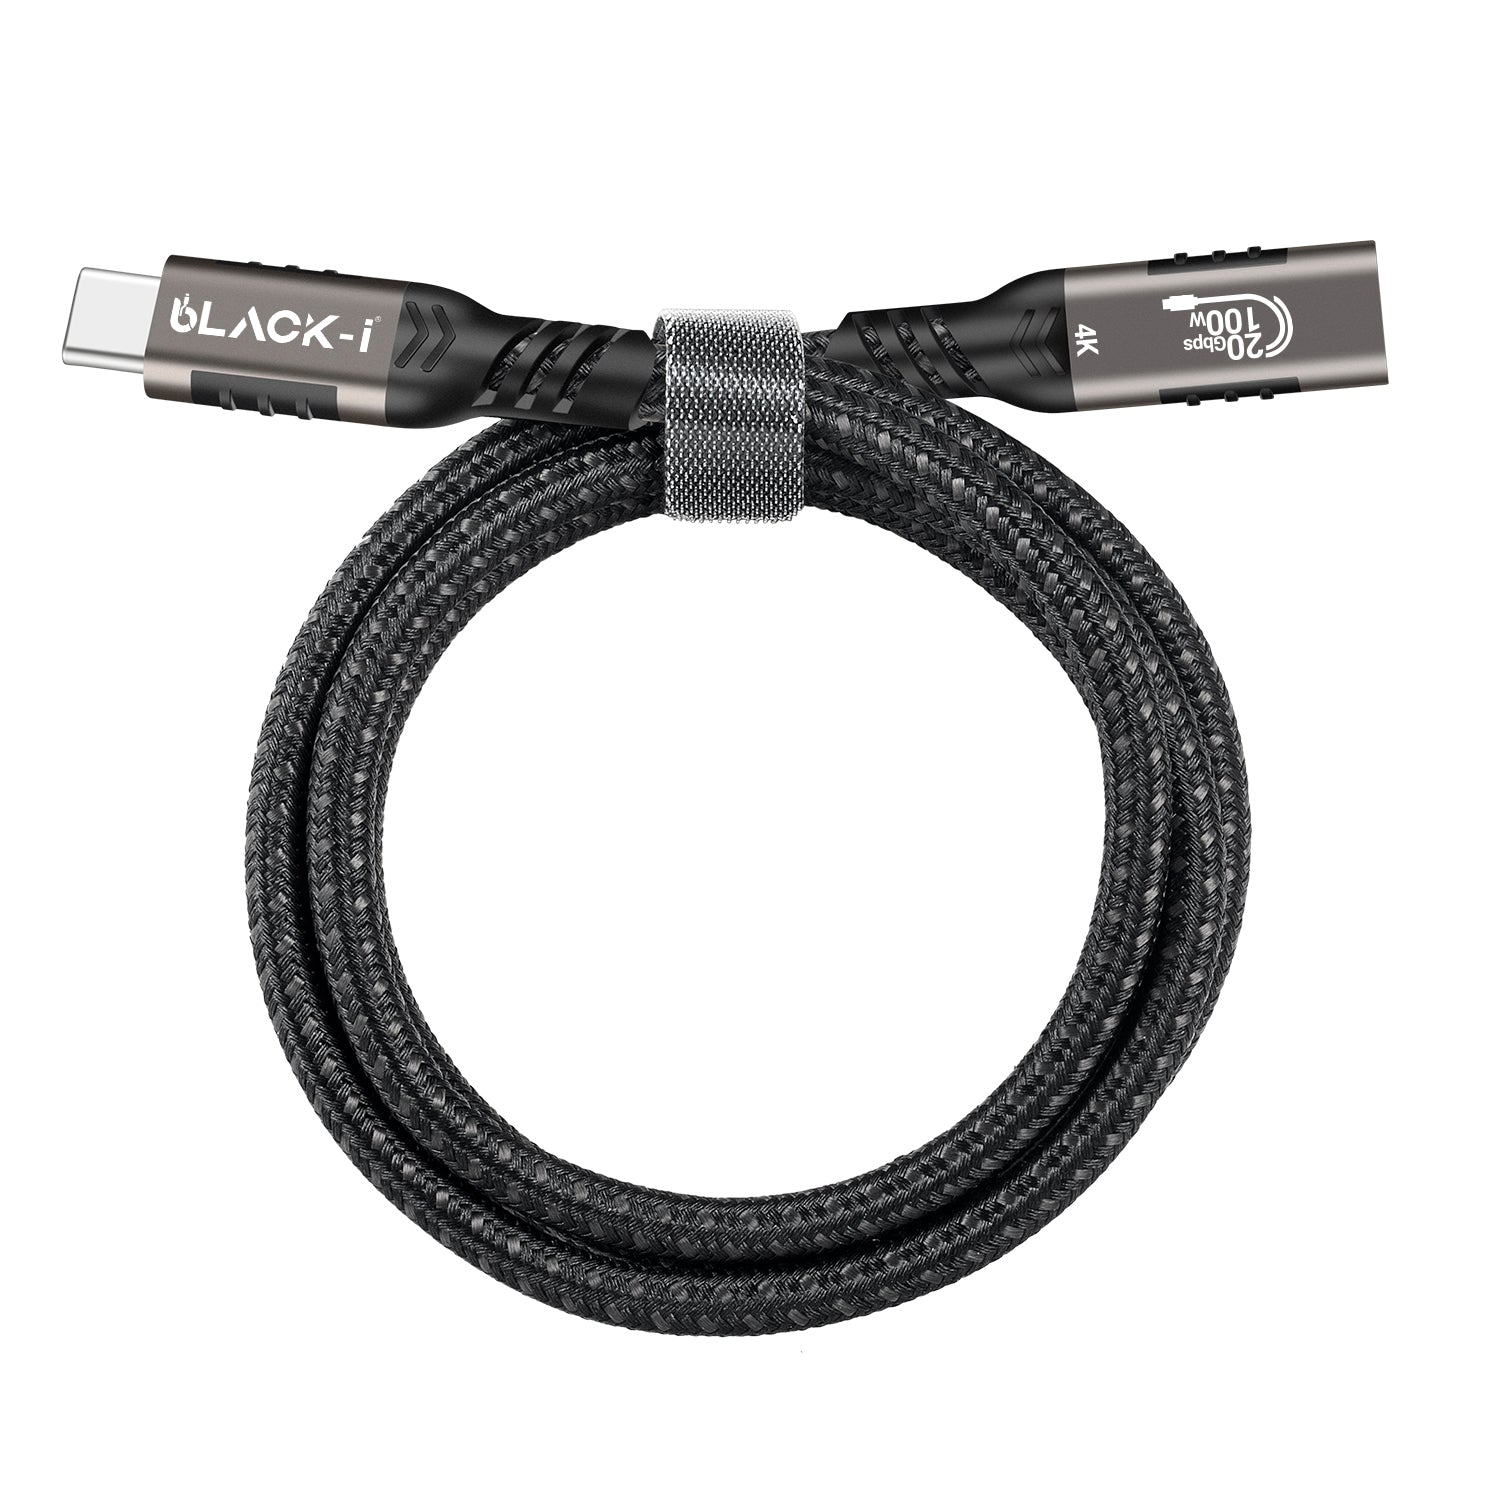 Black-i USB-C Extension 4K Cable - 1.5 Meter Length with 20 Gbps – Extend Your Connectivity with High-Speed Data Transfer for Superior 4K Visuals